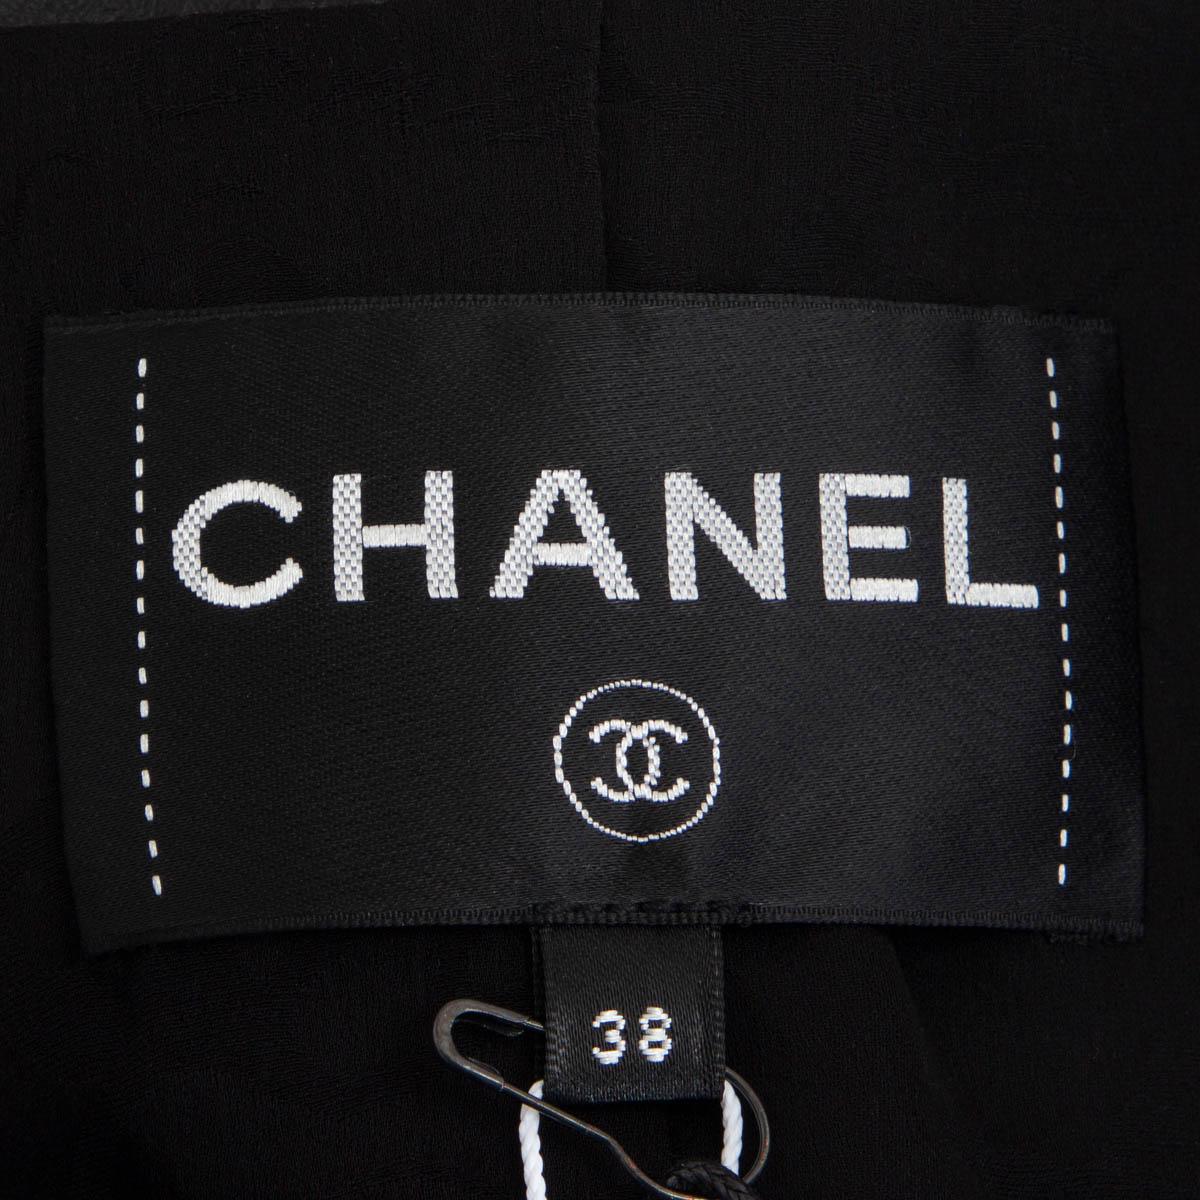 CHANEL black & blue 2018 METIER'S HAMBURG STRIPED LEATHER Jacket 38 S For Sale 1